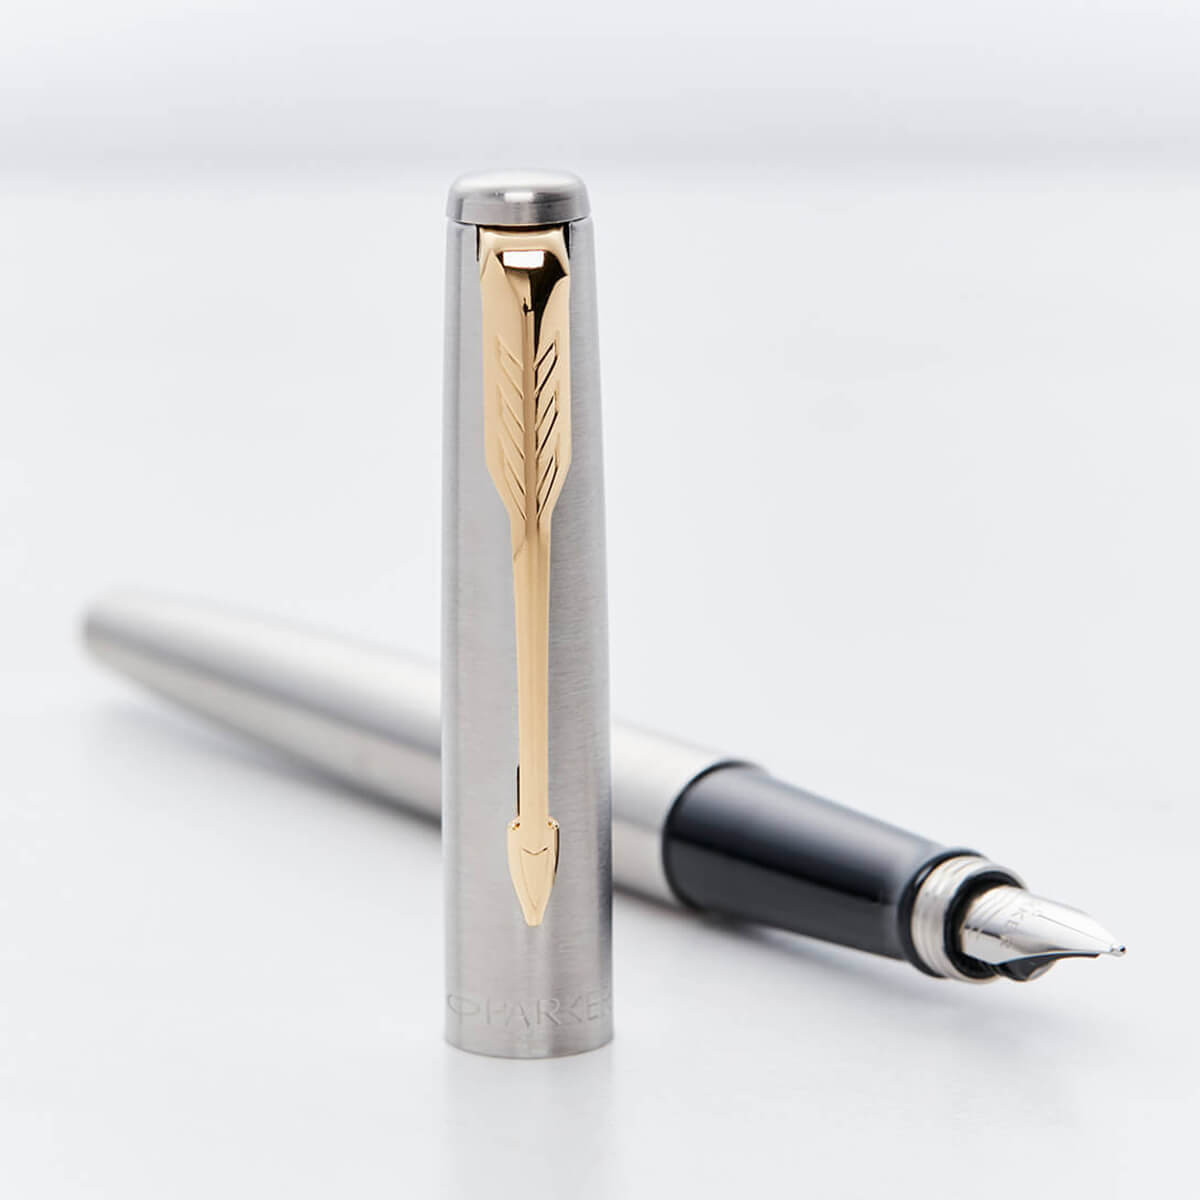 parker fountain pen stainless steel